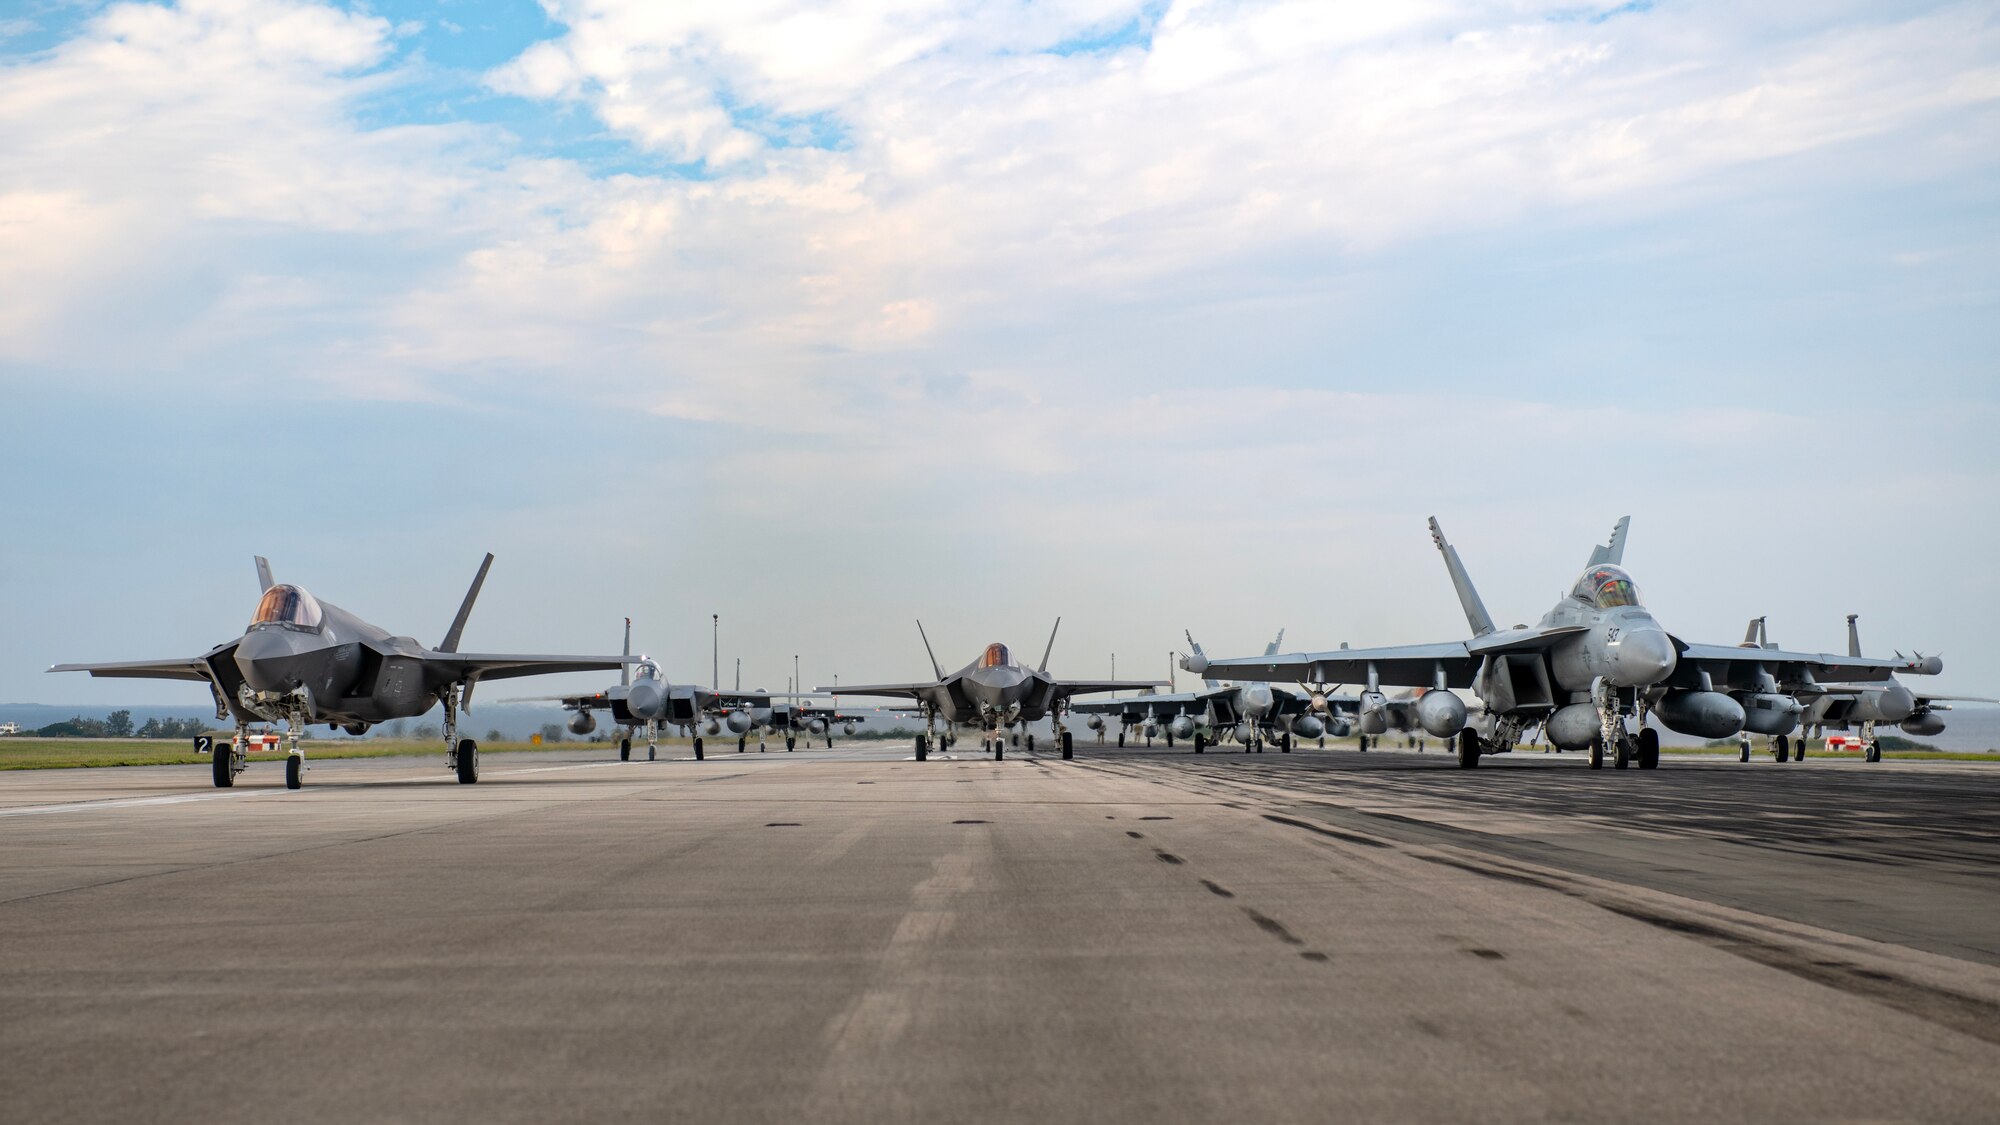 U.S. military aircraft line up on the runway during an elephant walk at Kadena Air Base, Japan, Nov. 21, 2023. Similar training is routinely conducted at U.S. Air Force bases across Japan and around the globe to ensure U.S. Forces Japan’s readiness to respond to a range of potential contingencies. (U.S. Air Force photo by Staff Sgt. Roth)